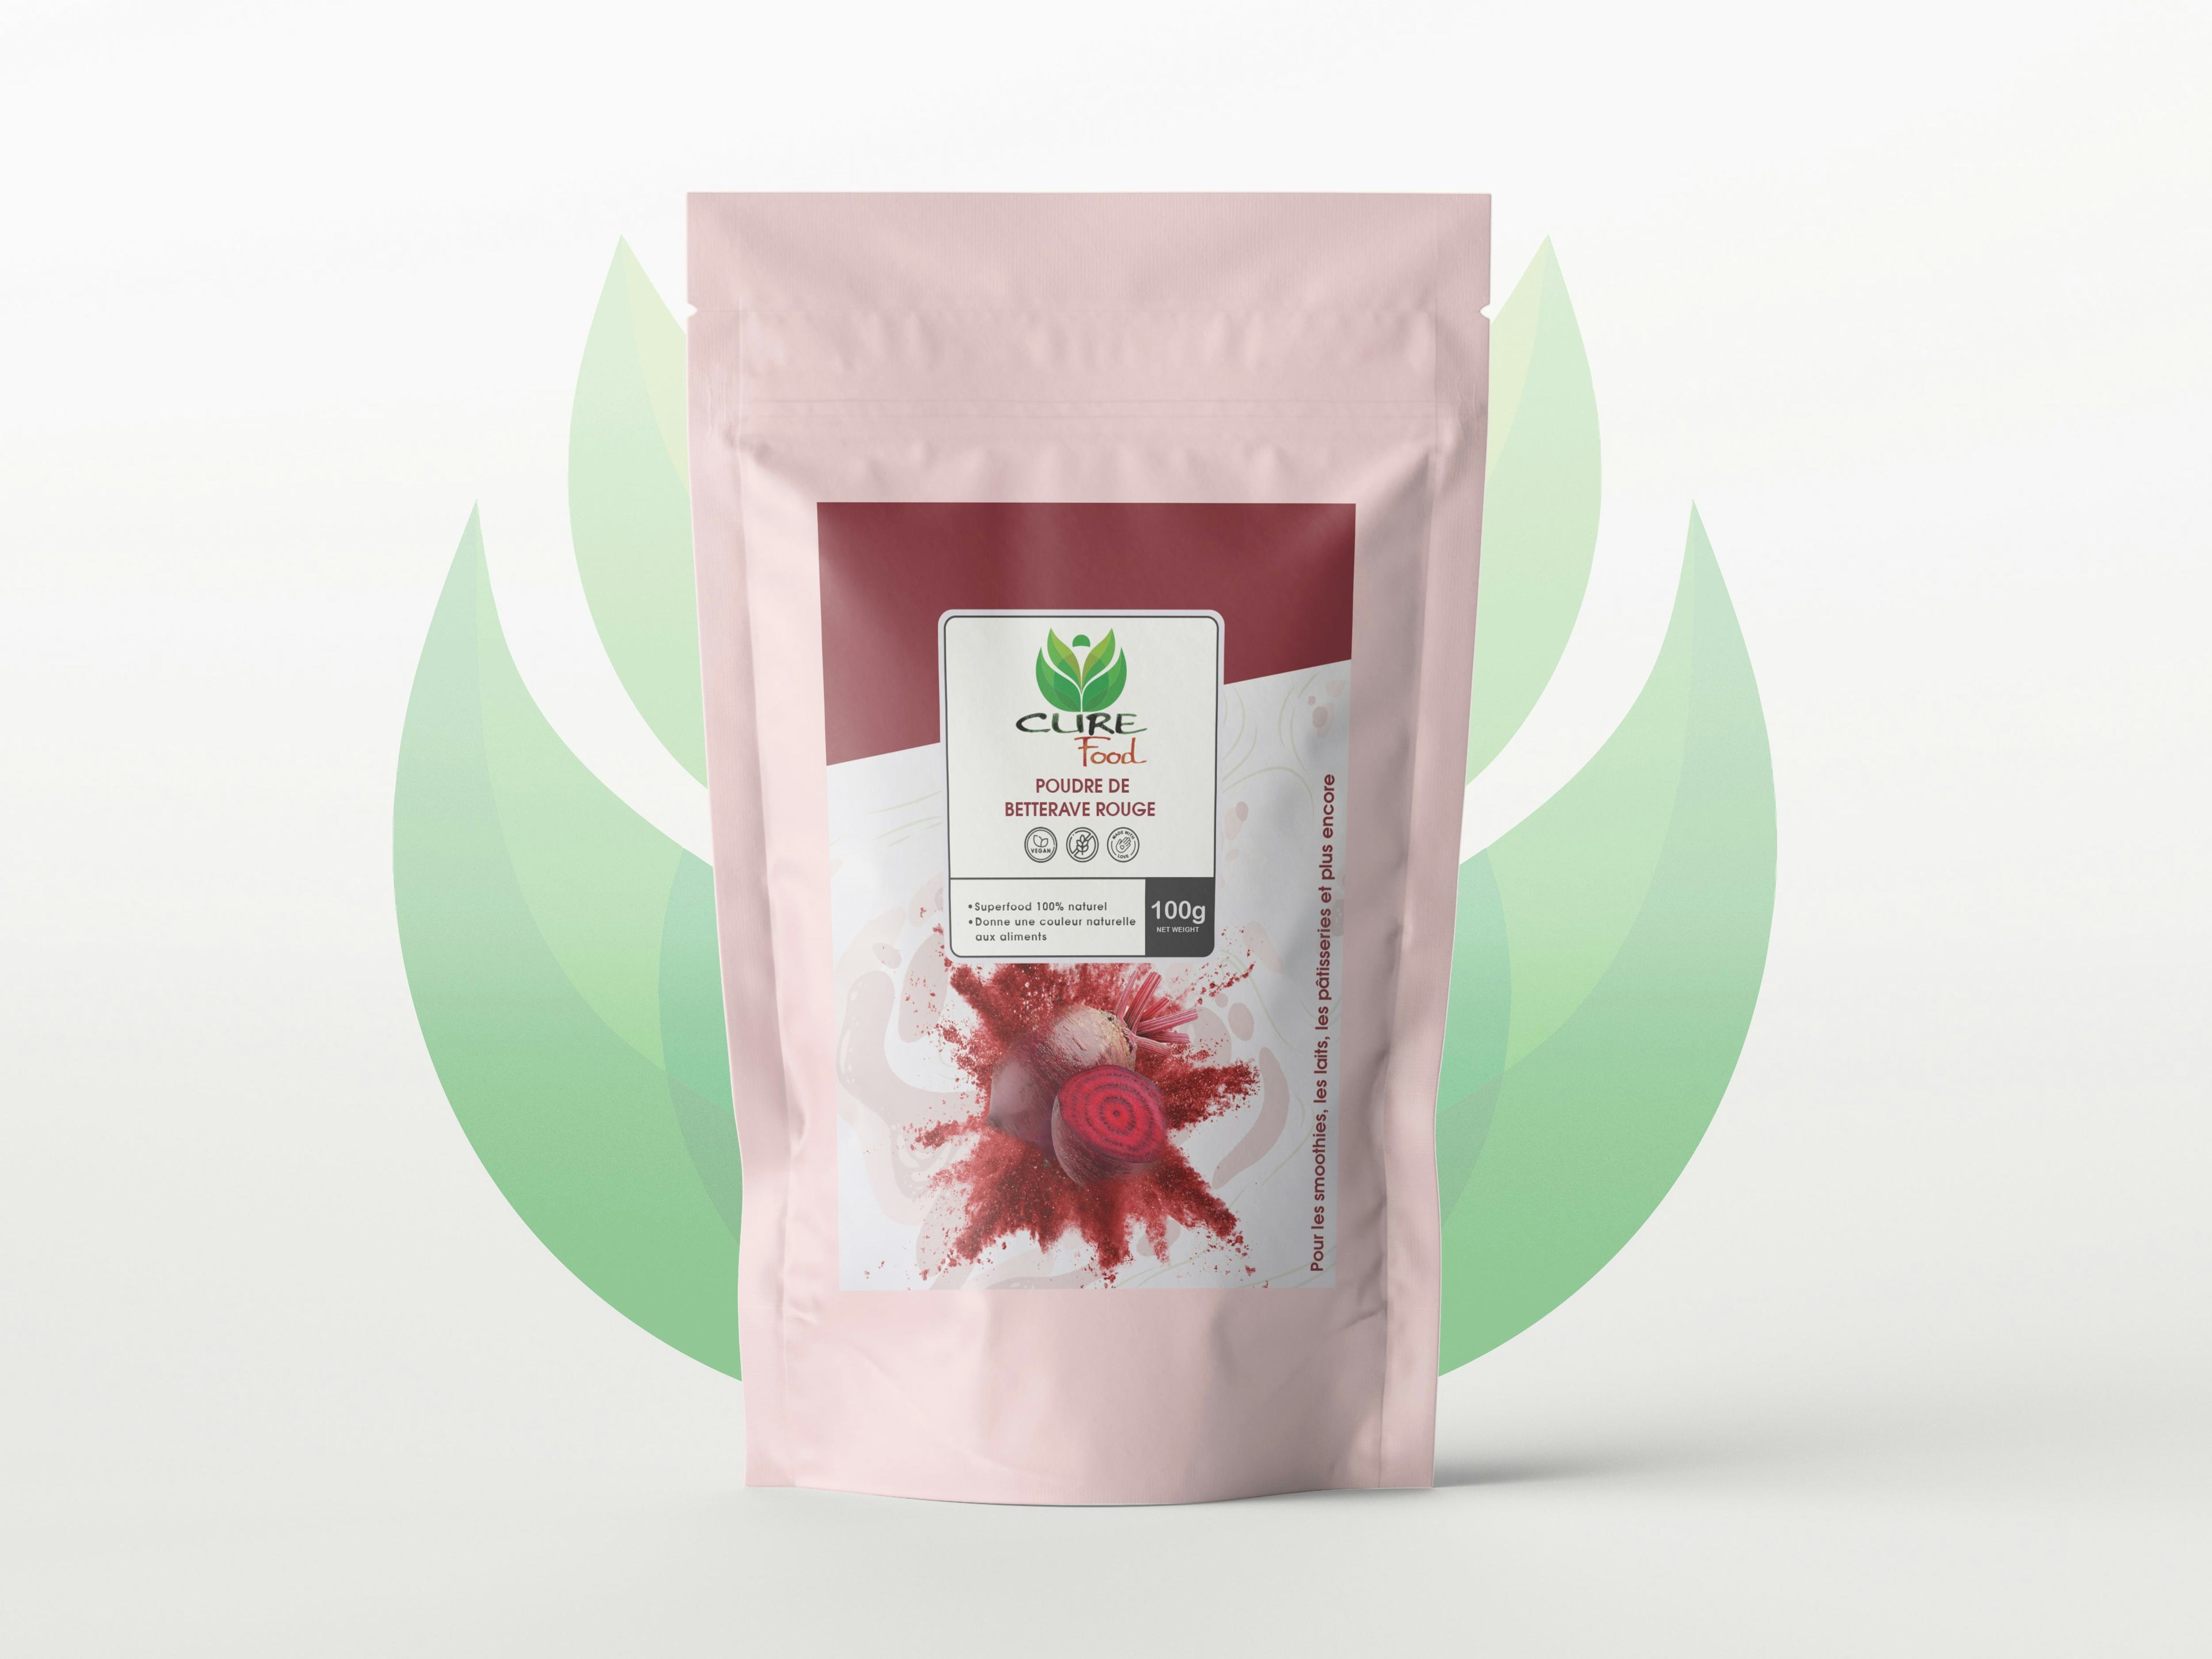 Red Beet Powder, artisanal product for direct sale in Switzerland